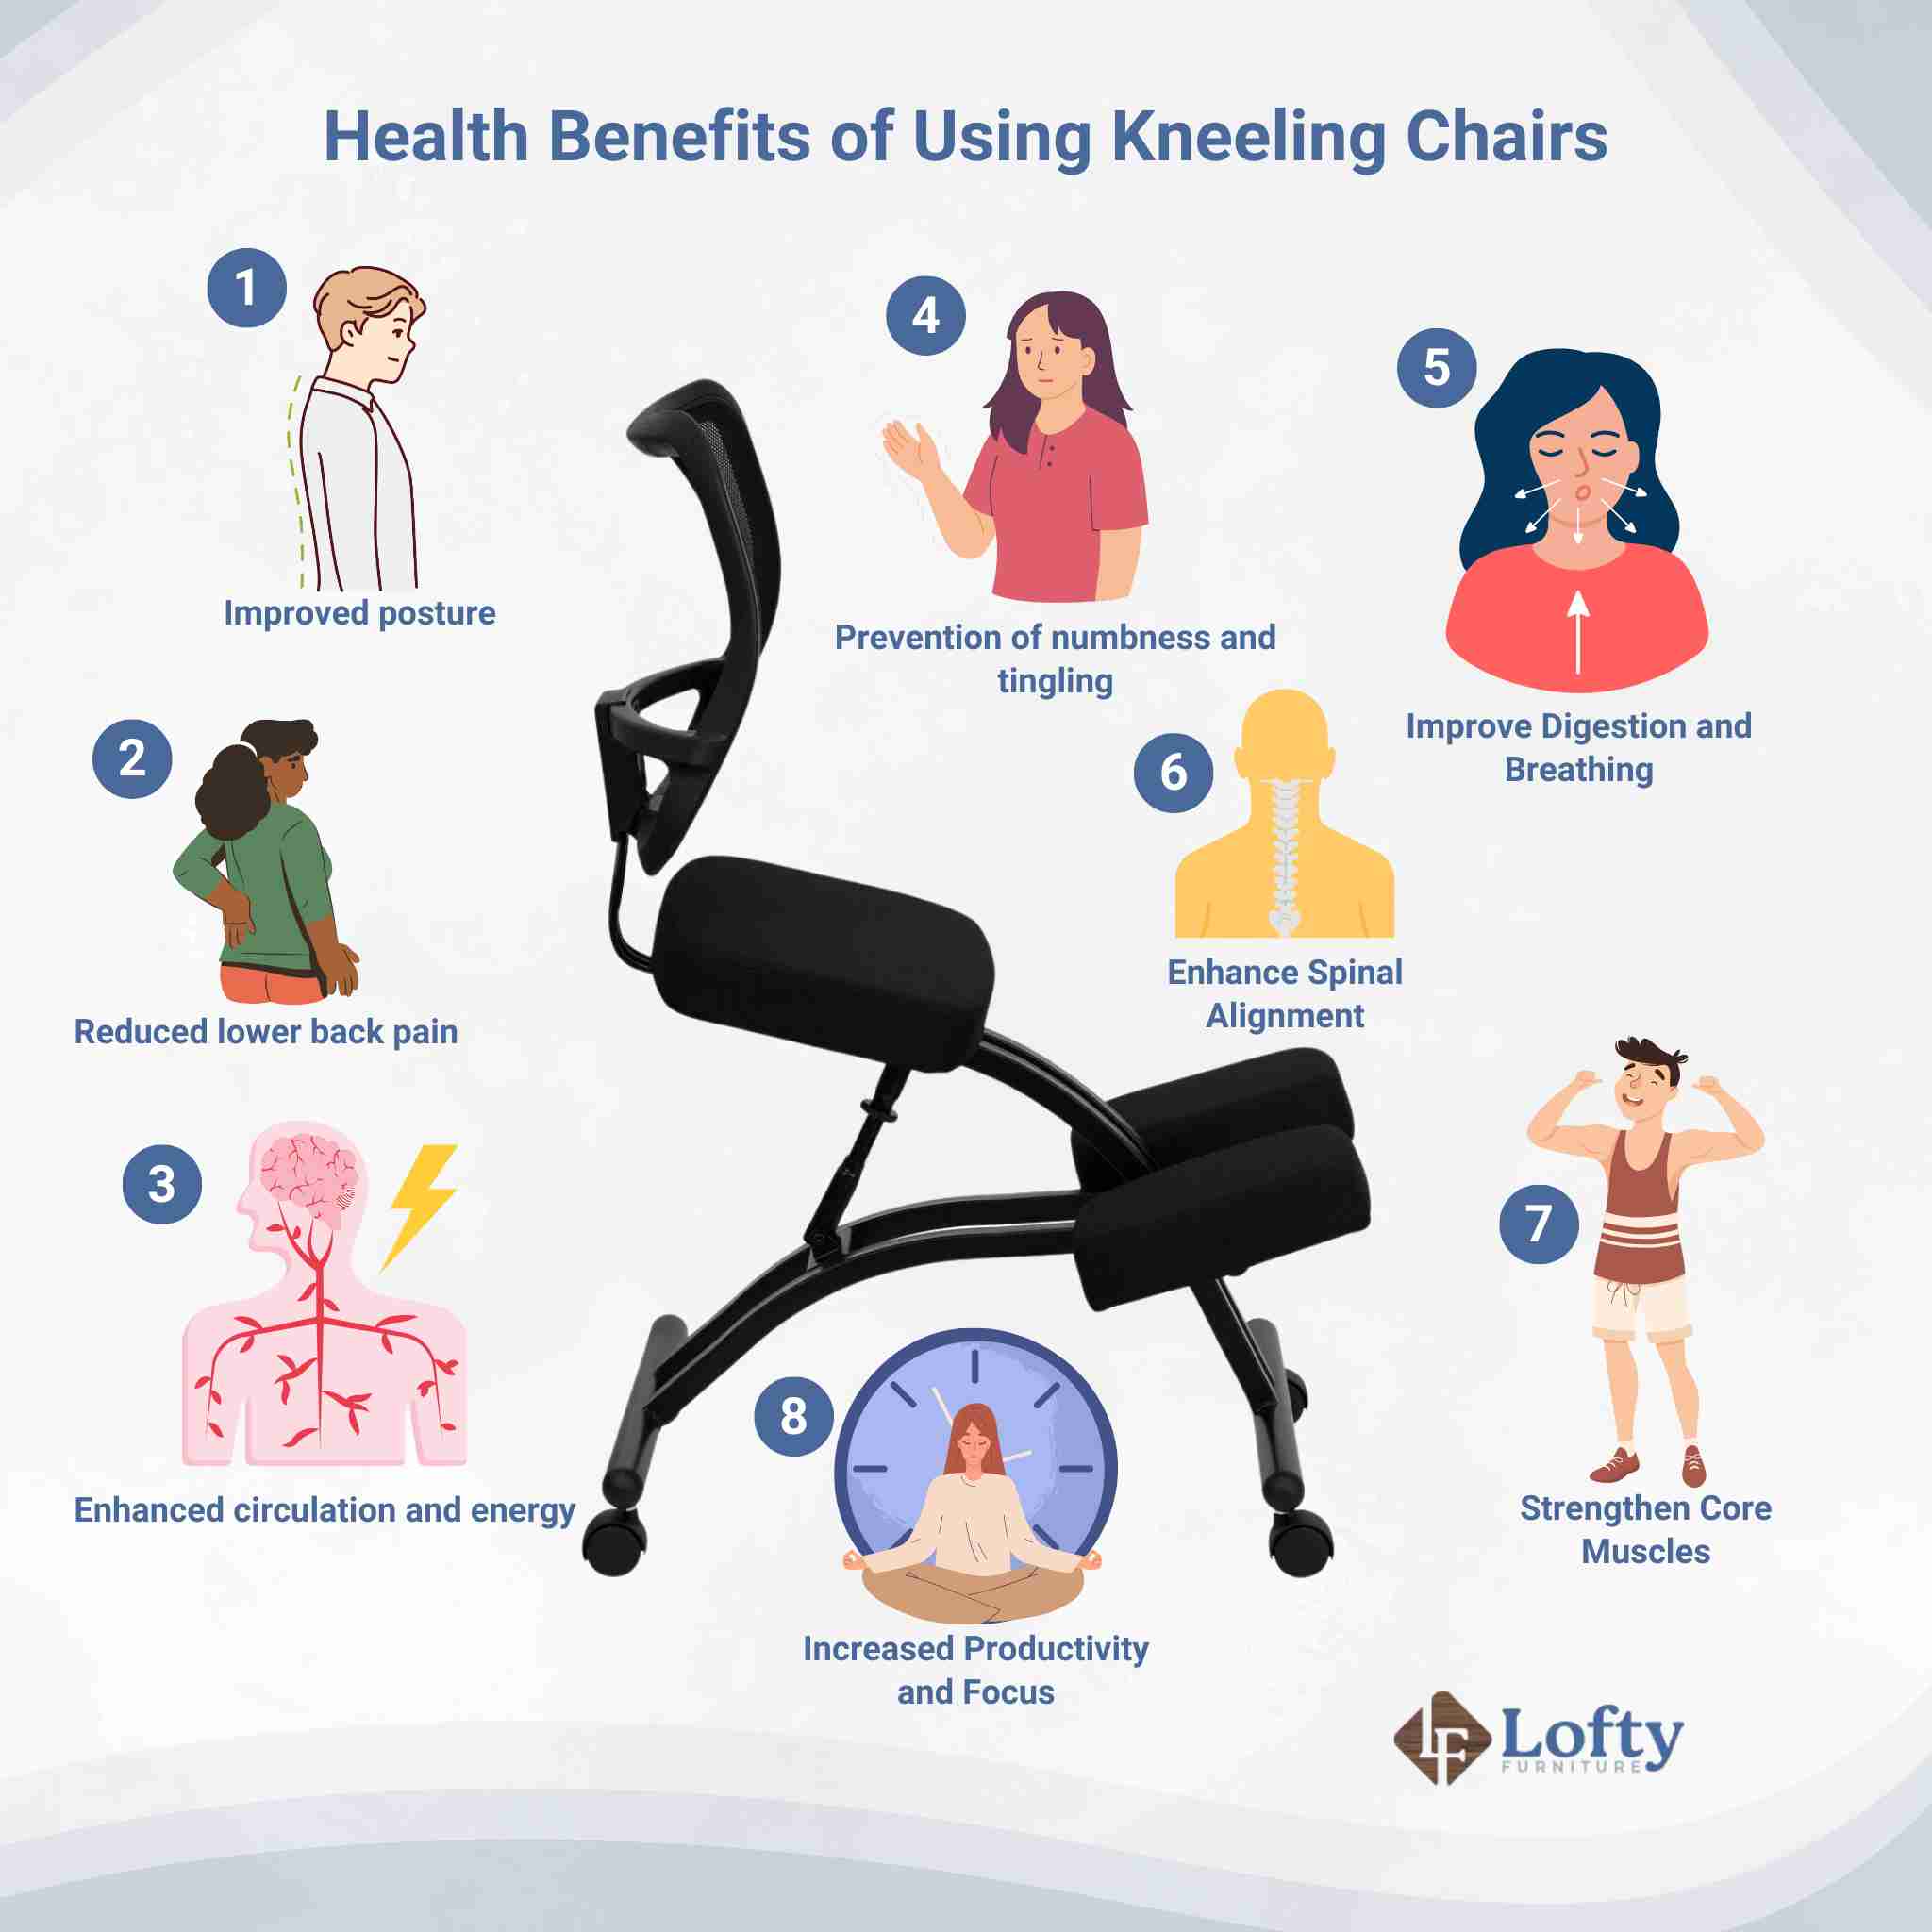 An illustration of the health benefits of using kneeling chairs.